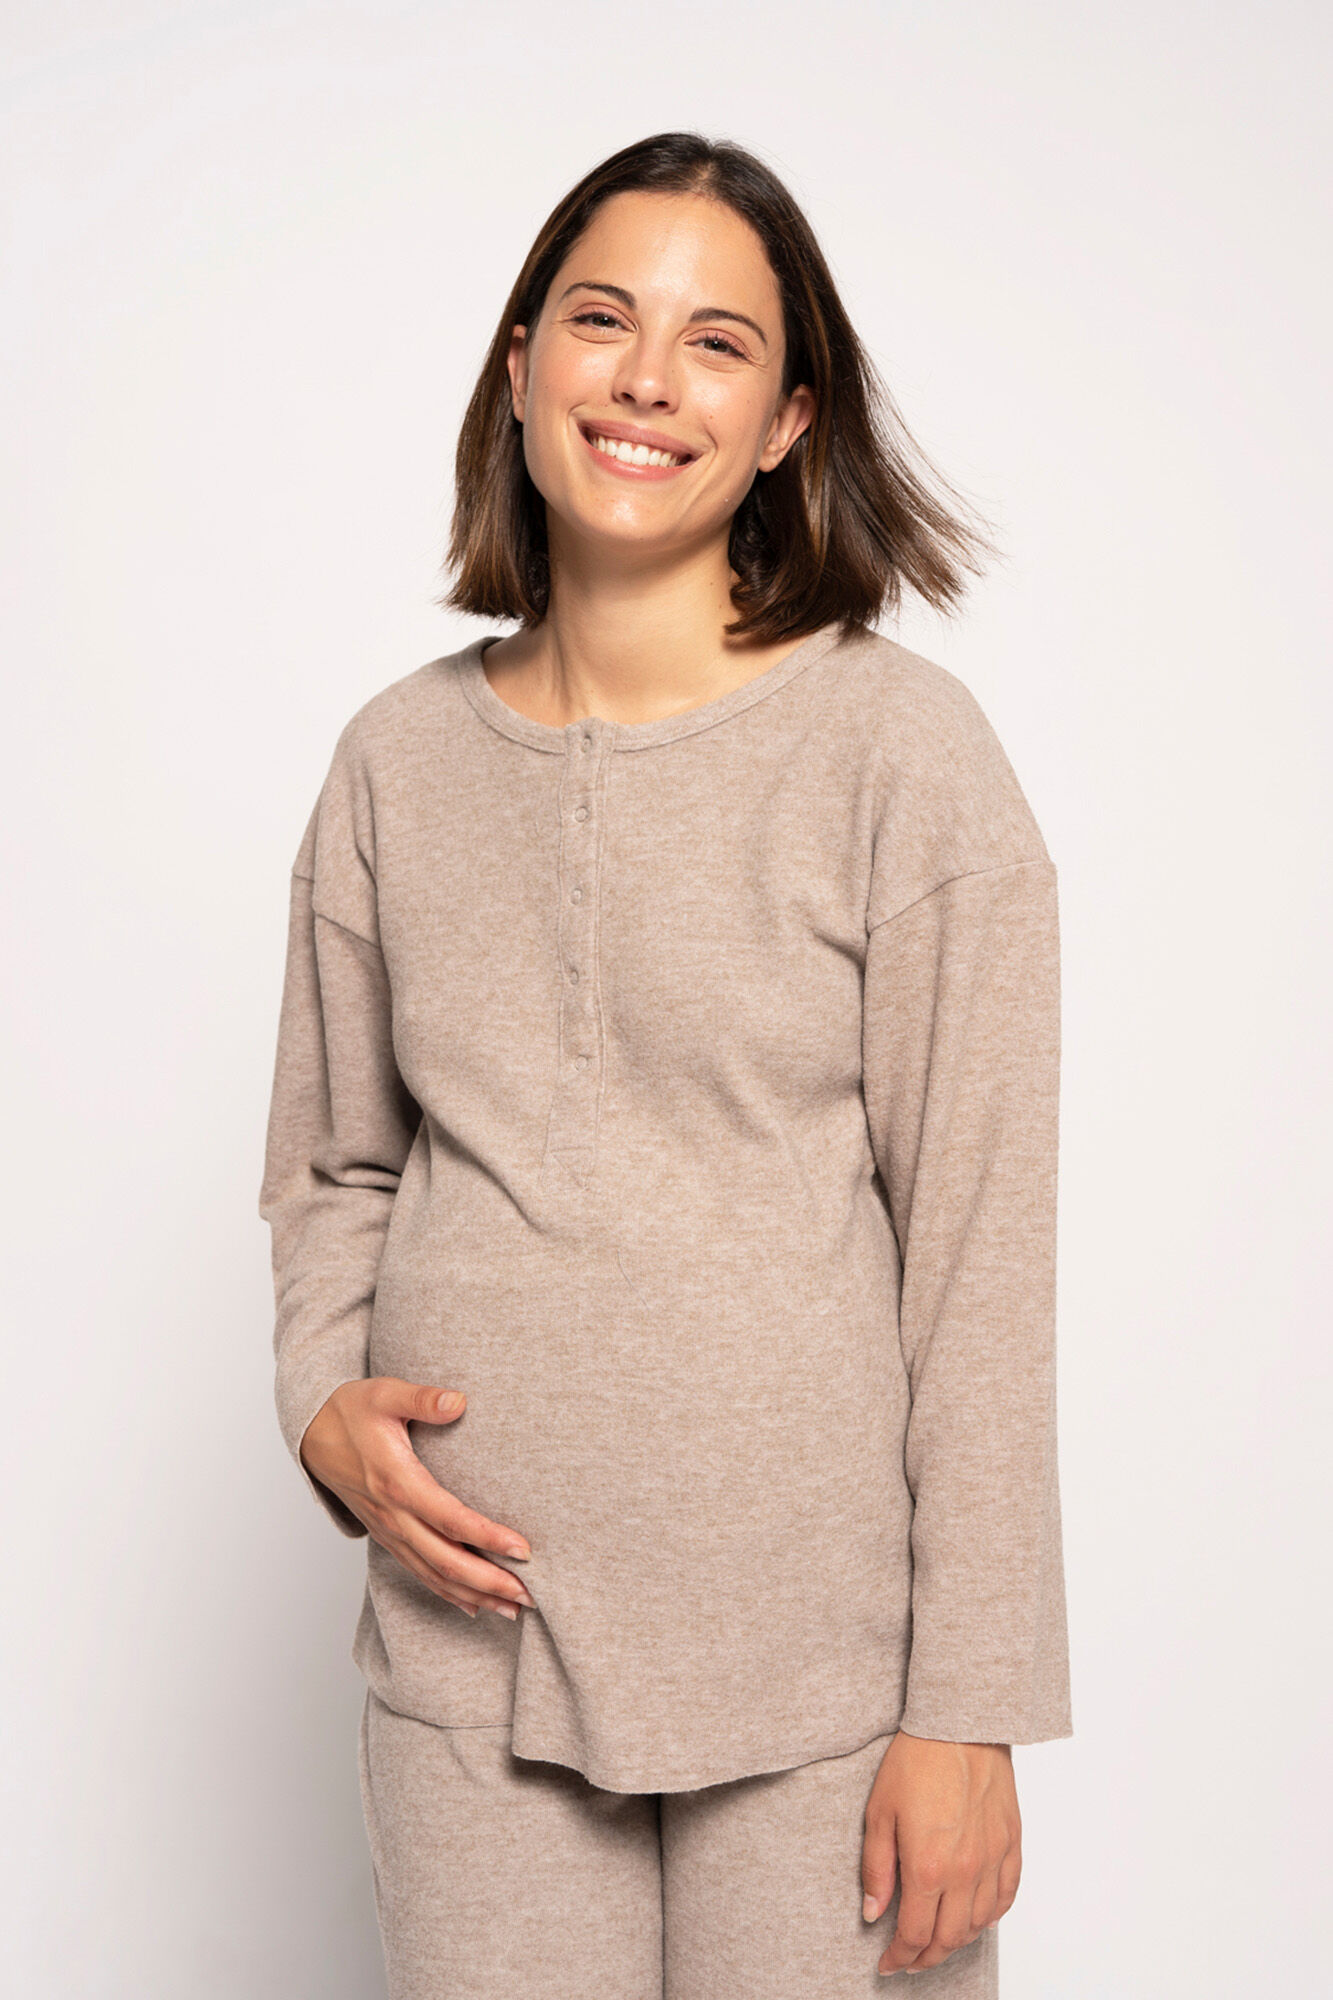 Shop Wide Range Of Maternity Trousers Online At Great Deals